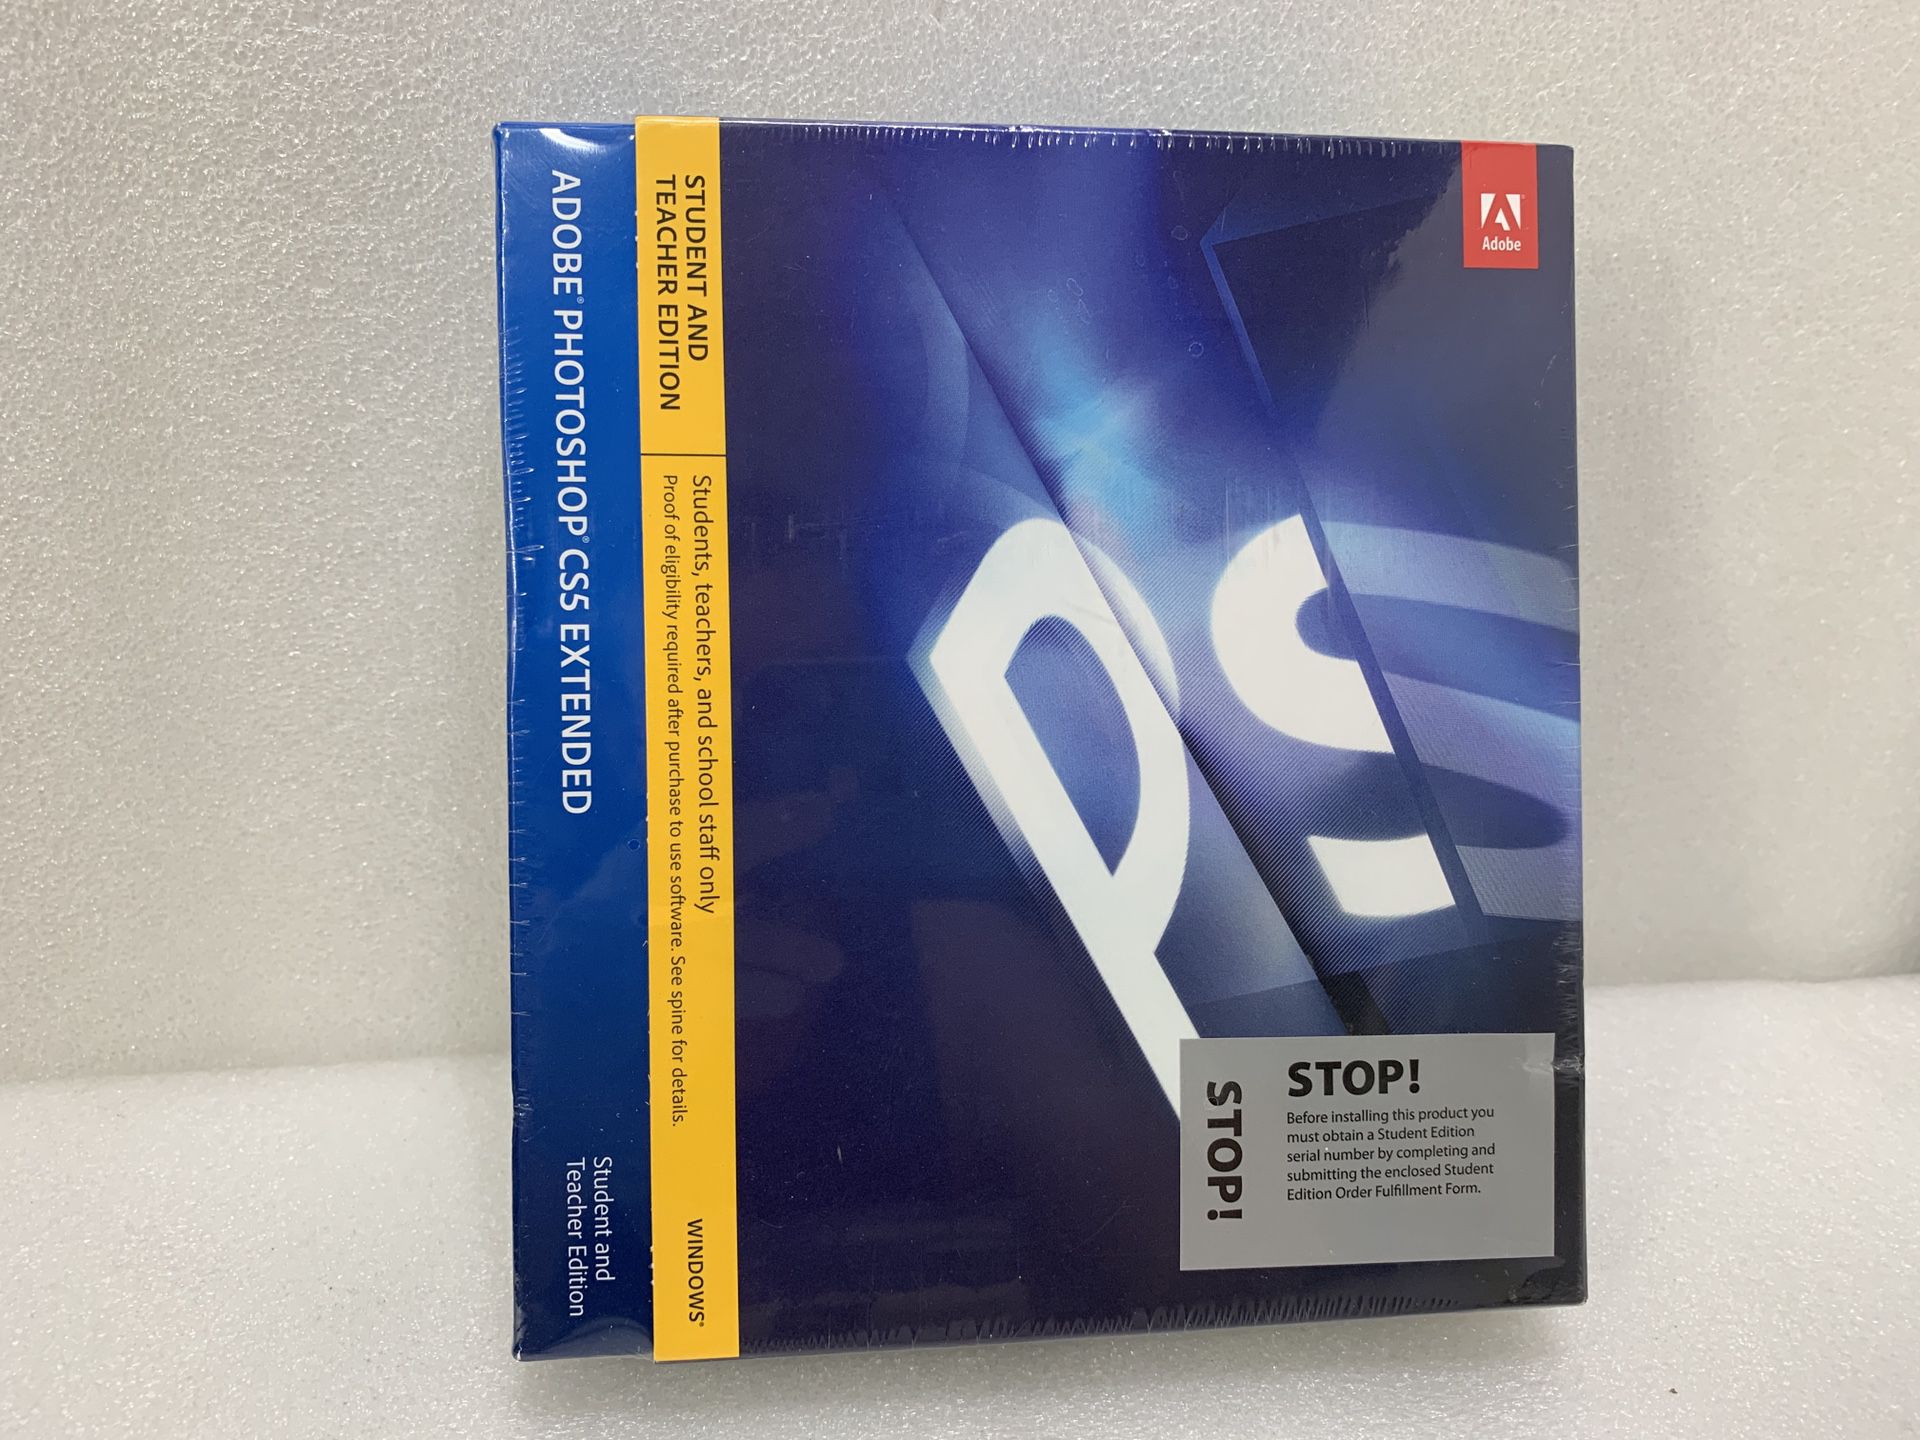 Adobe Photoshop CS5 Extended (Student and Teacher Edition) for WINDOWS